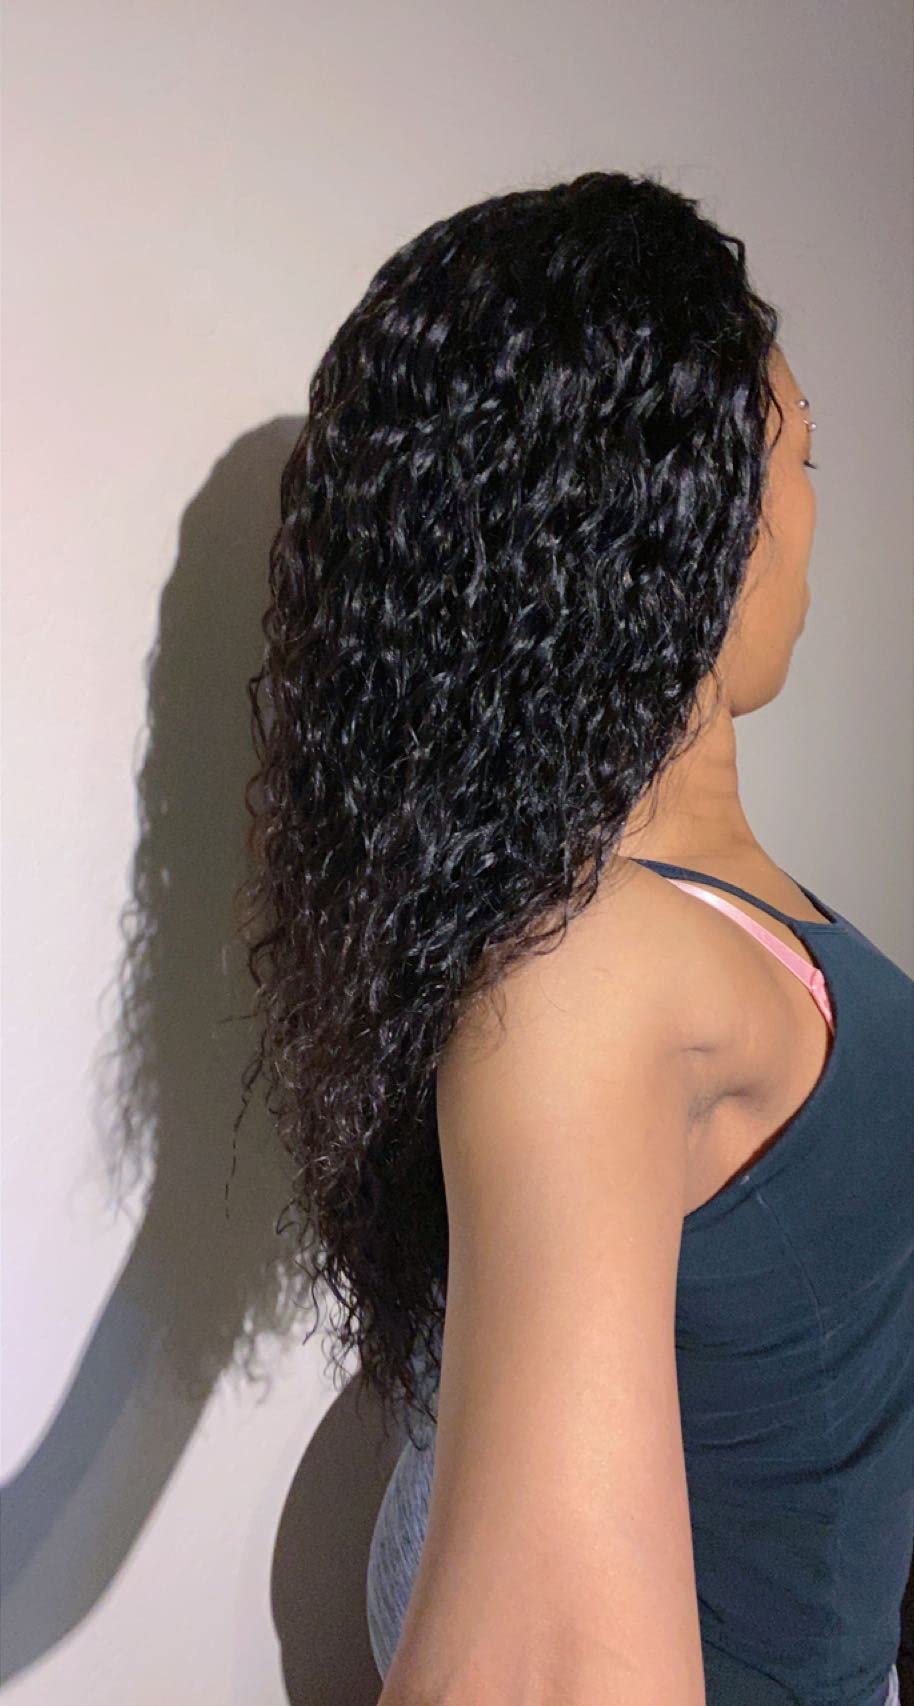 This hair is amazing! I love the fullness of 